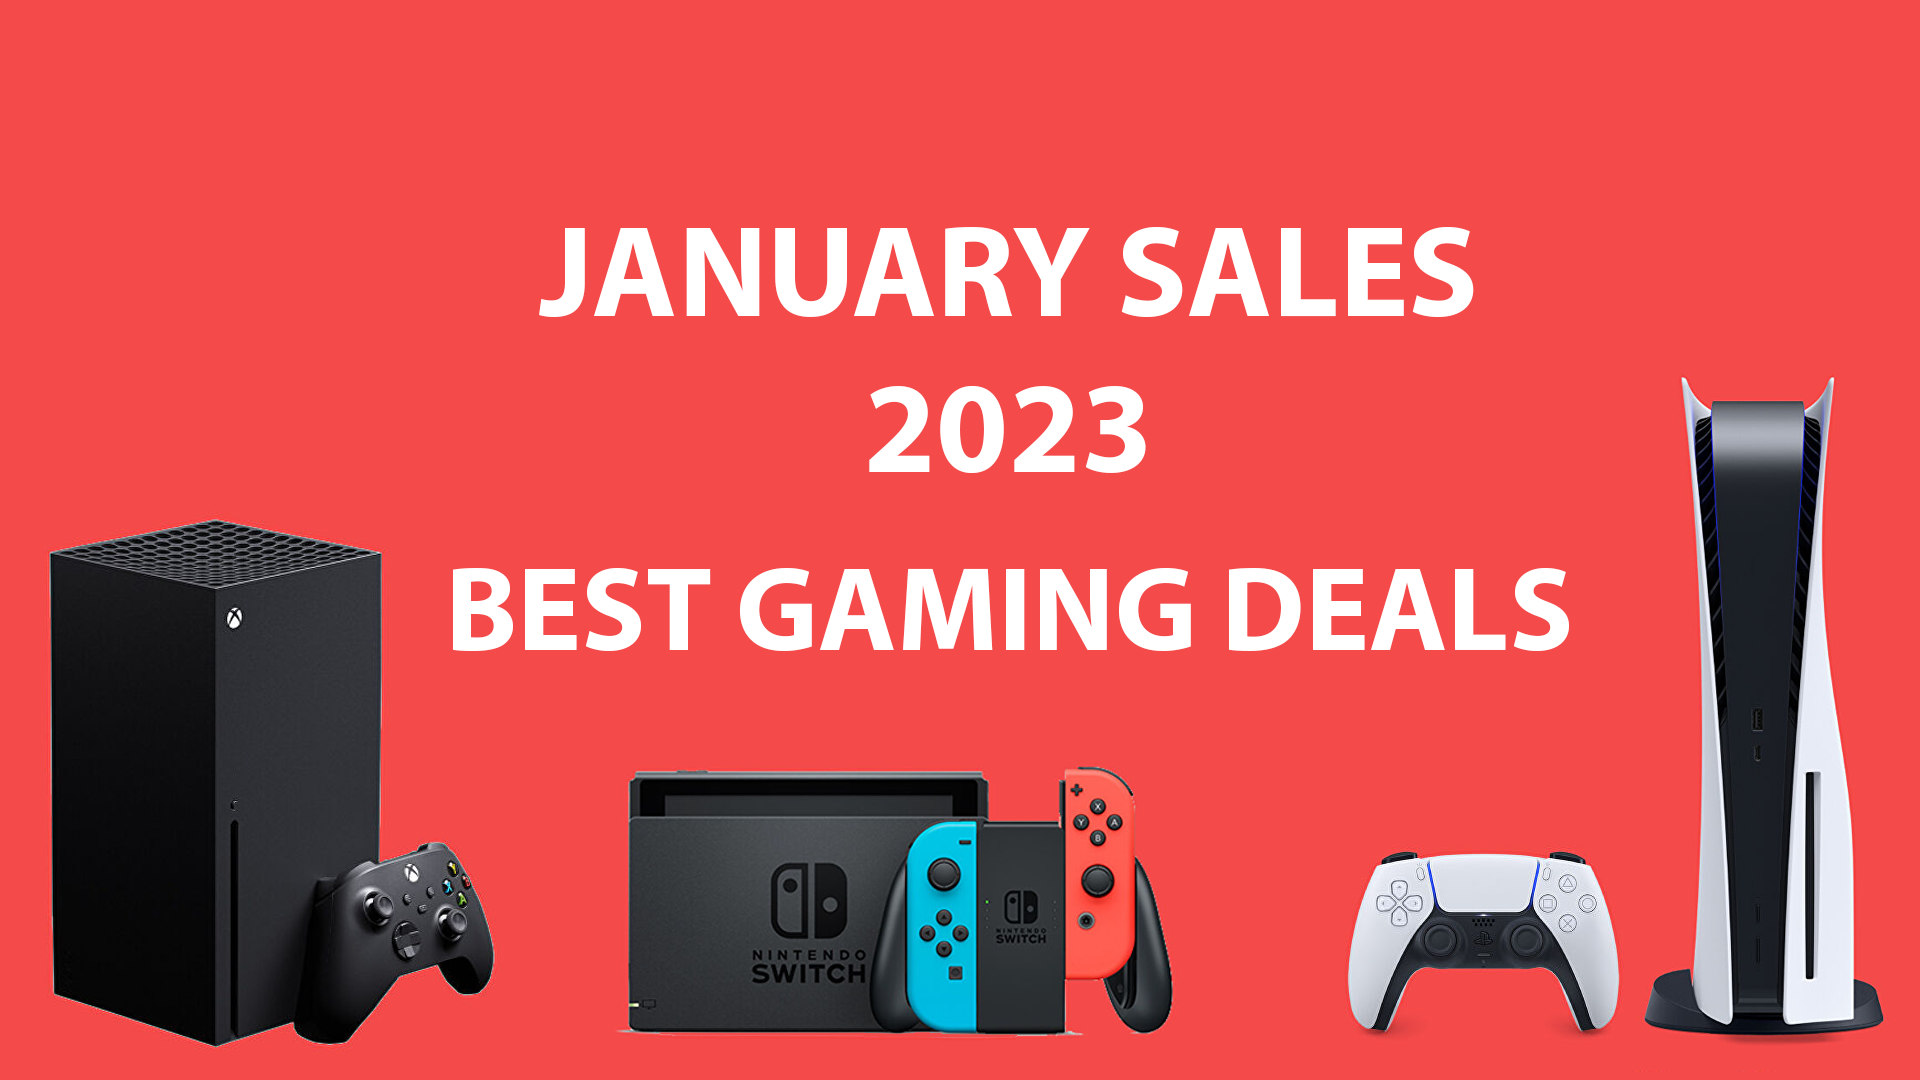 The january sales started and